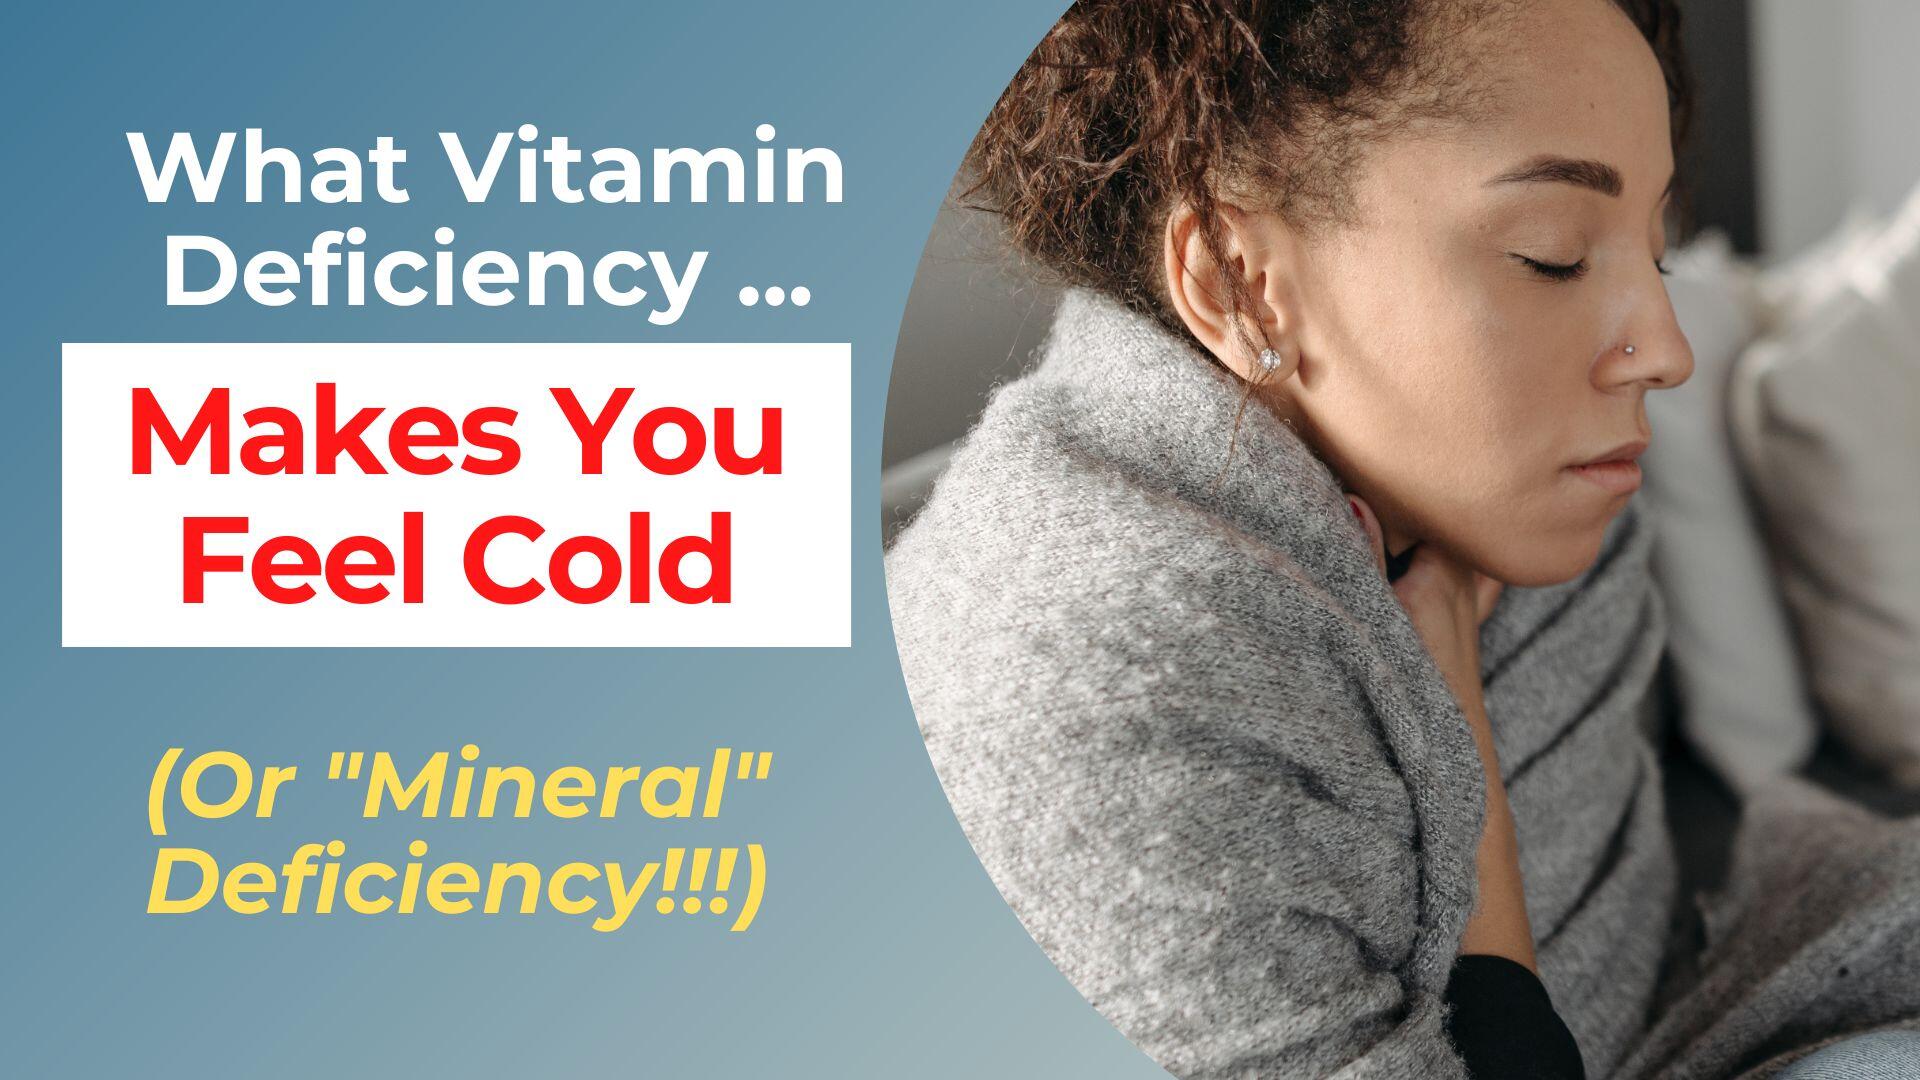 What Vitamin Deficiency Causes You to Feel Cold